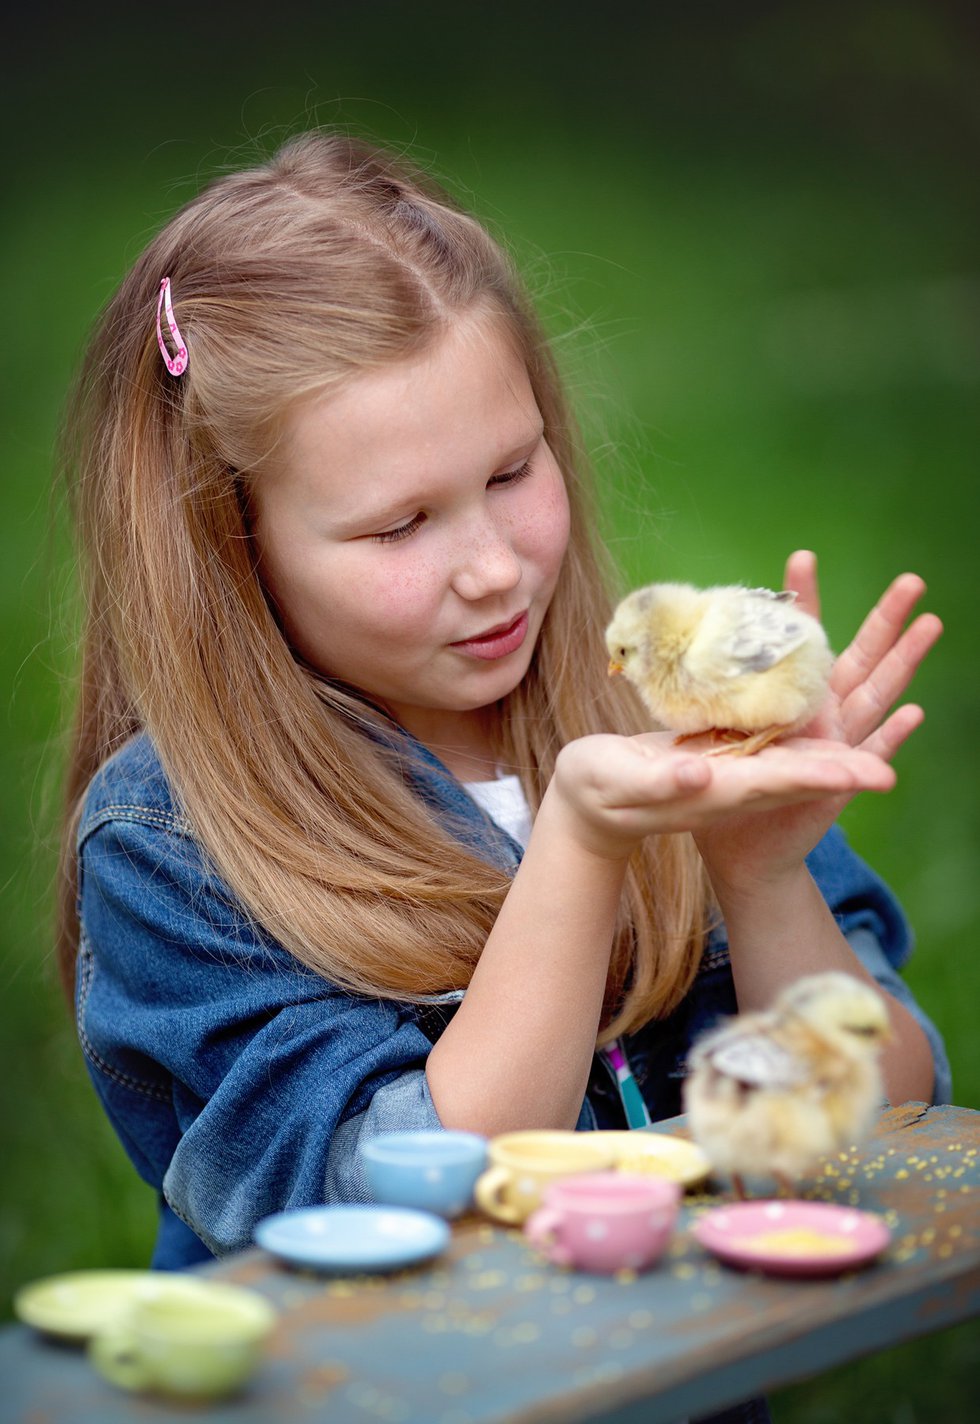 imagesevents27422girl-with-chick-jpg.jpe